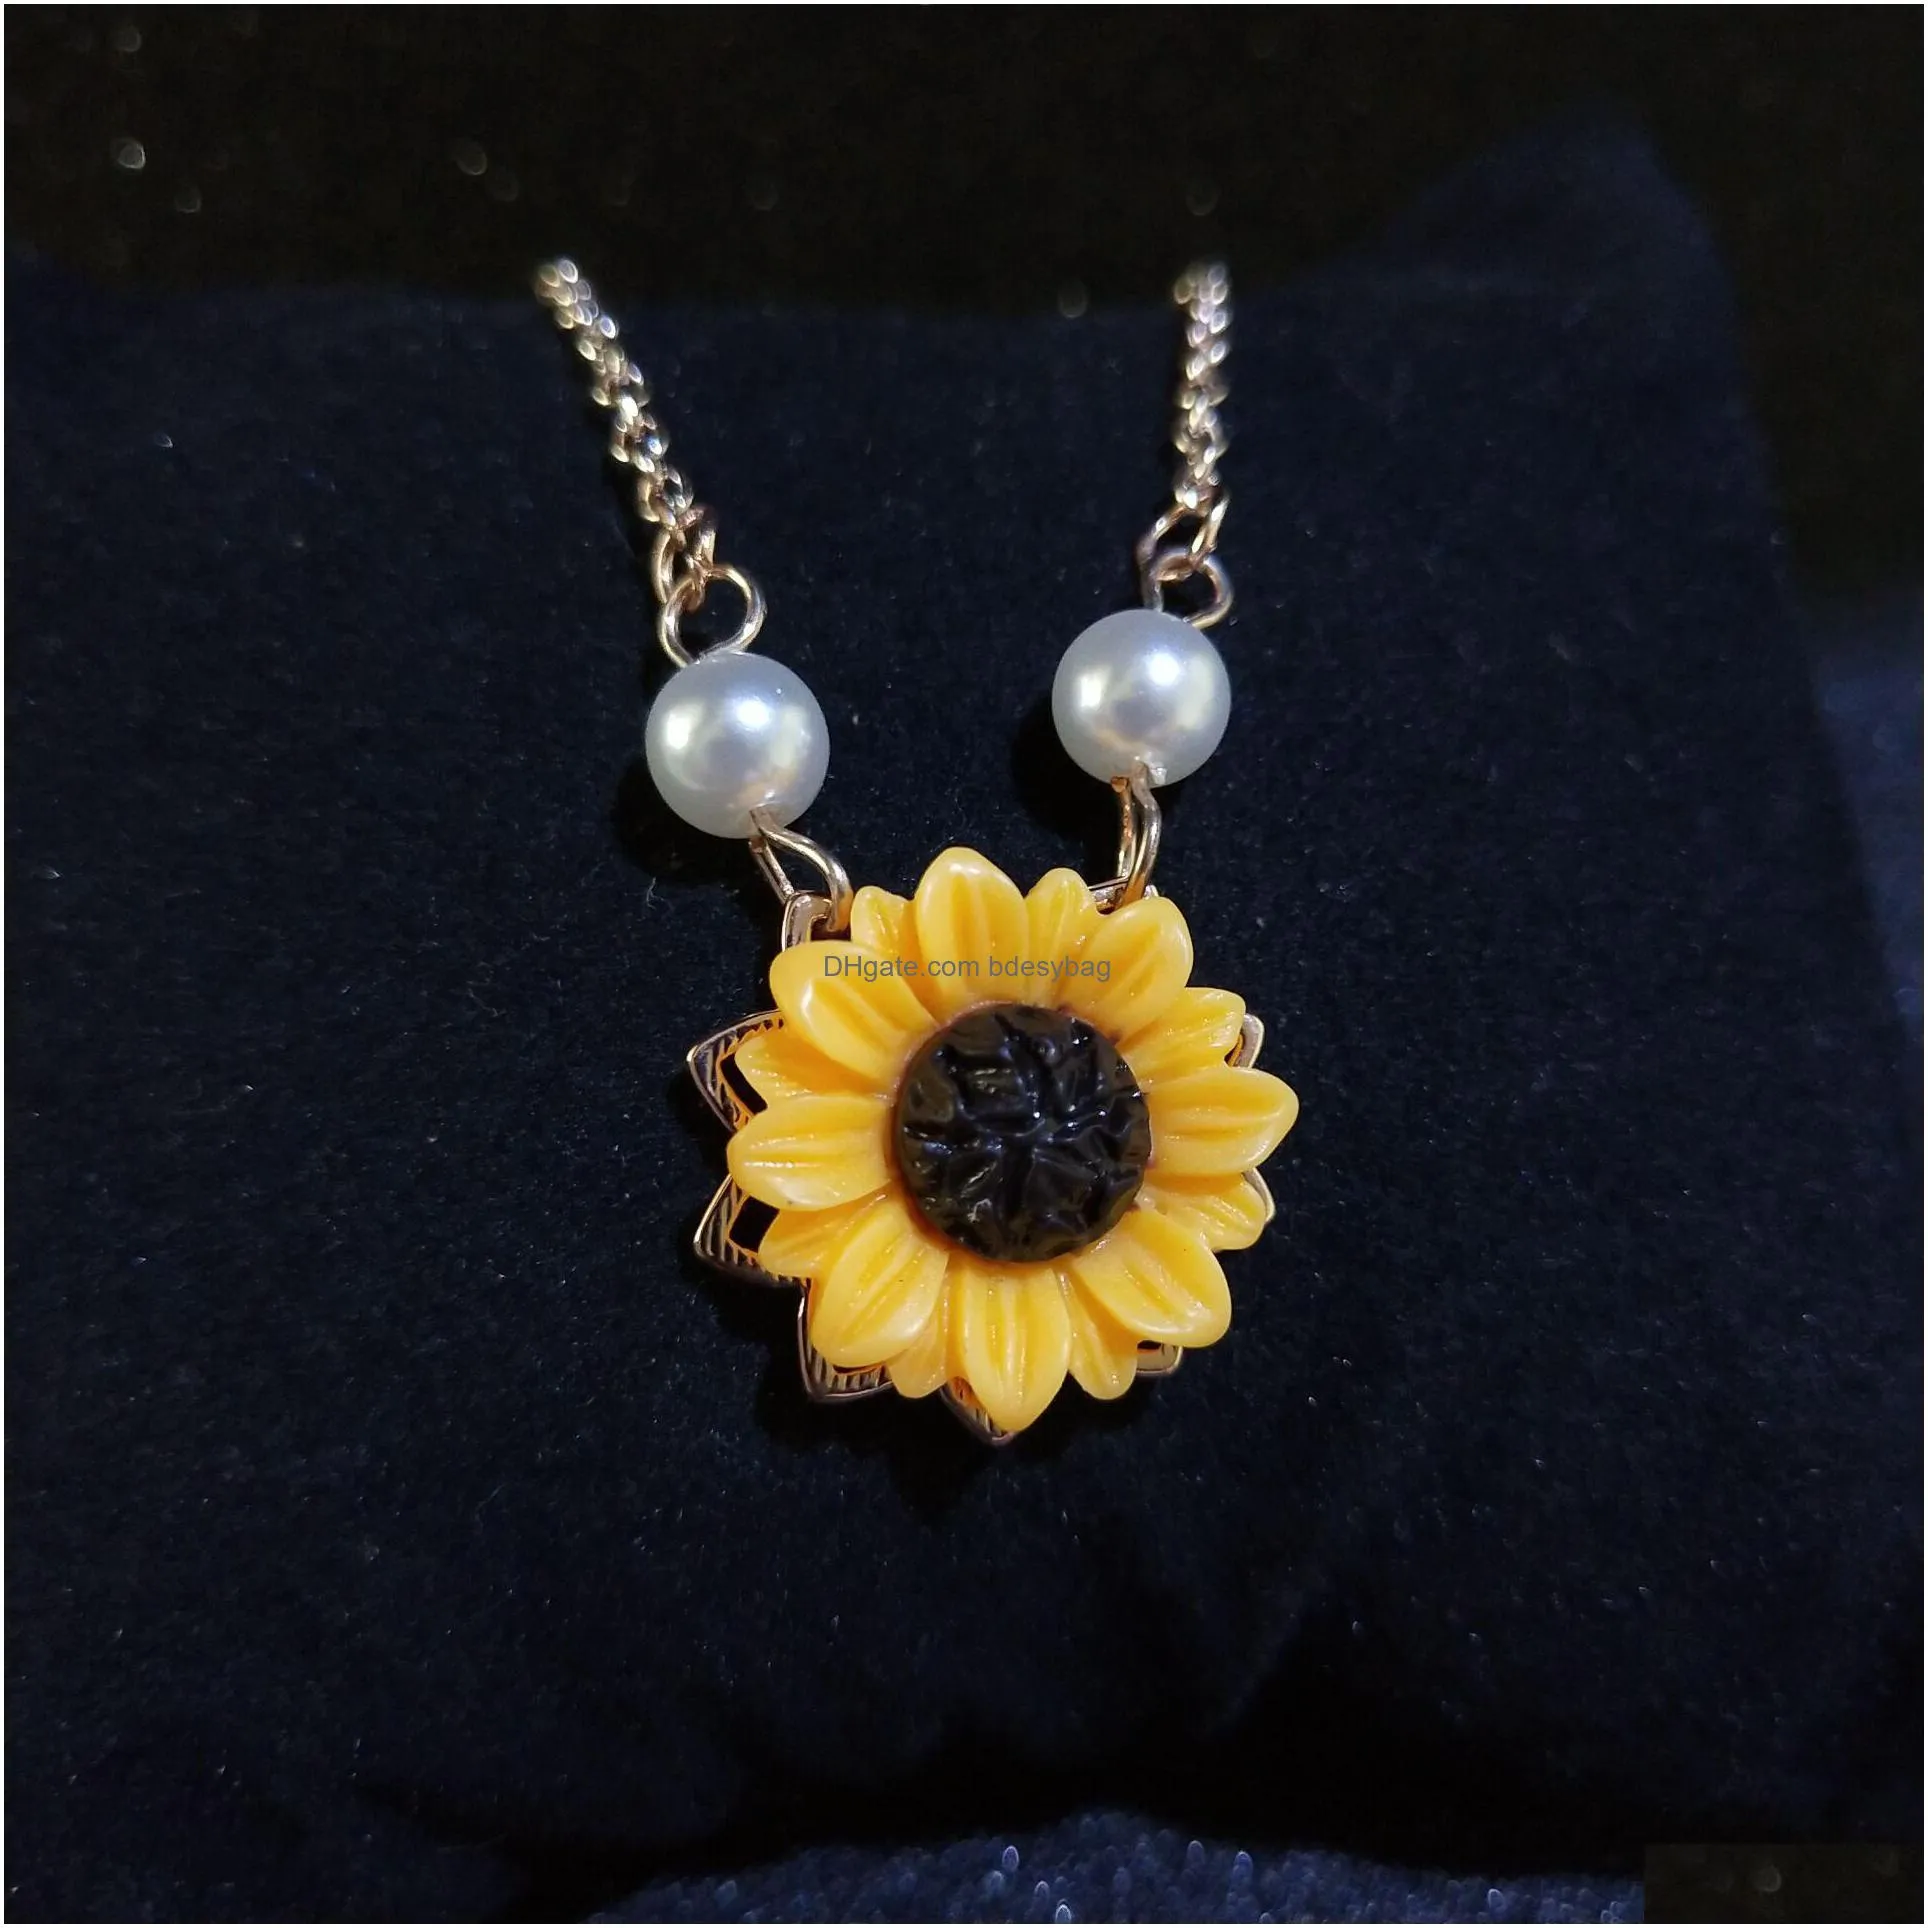 2020 new fashion sunflower leaf branch charm pendant necklace jewelry sweater necklace choker for gifts girls